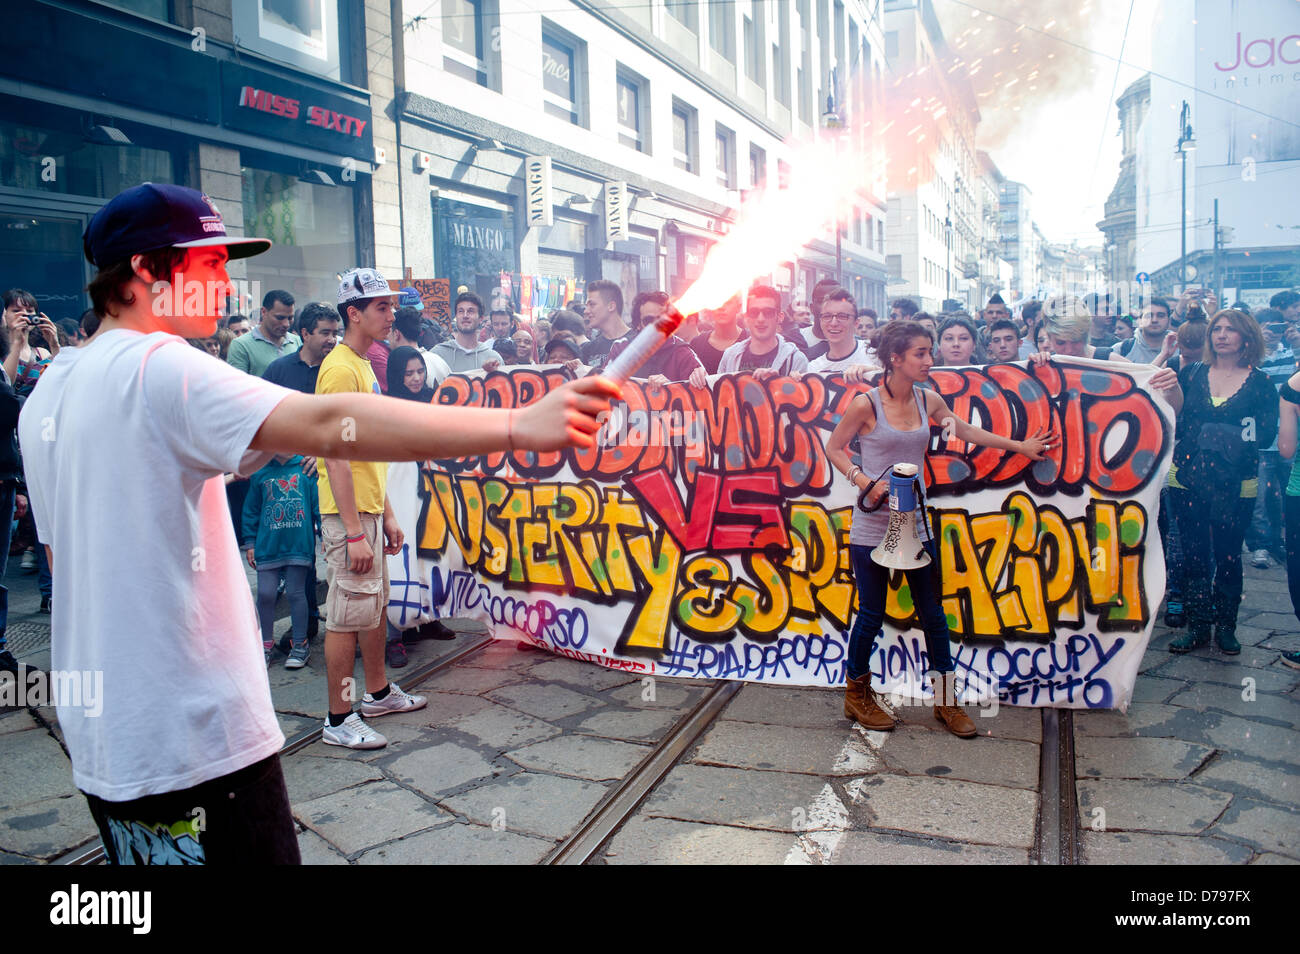 Milan, Italy - 1 May 2013: a boy holds a fired teargas during the celebrations of May Day in Milan where thousands gather to celebrate May Day and to protest against austerity measures.. Credit:  Piero Cruciatti / Alamy Live News Stock Photo